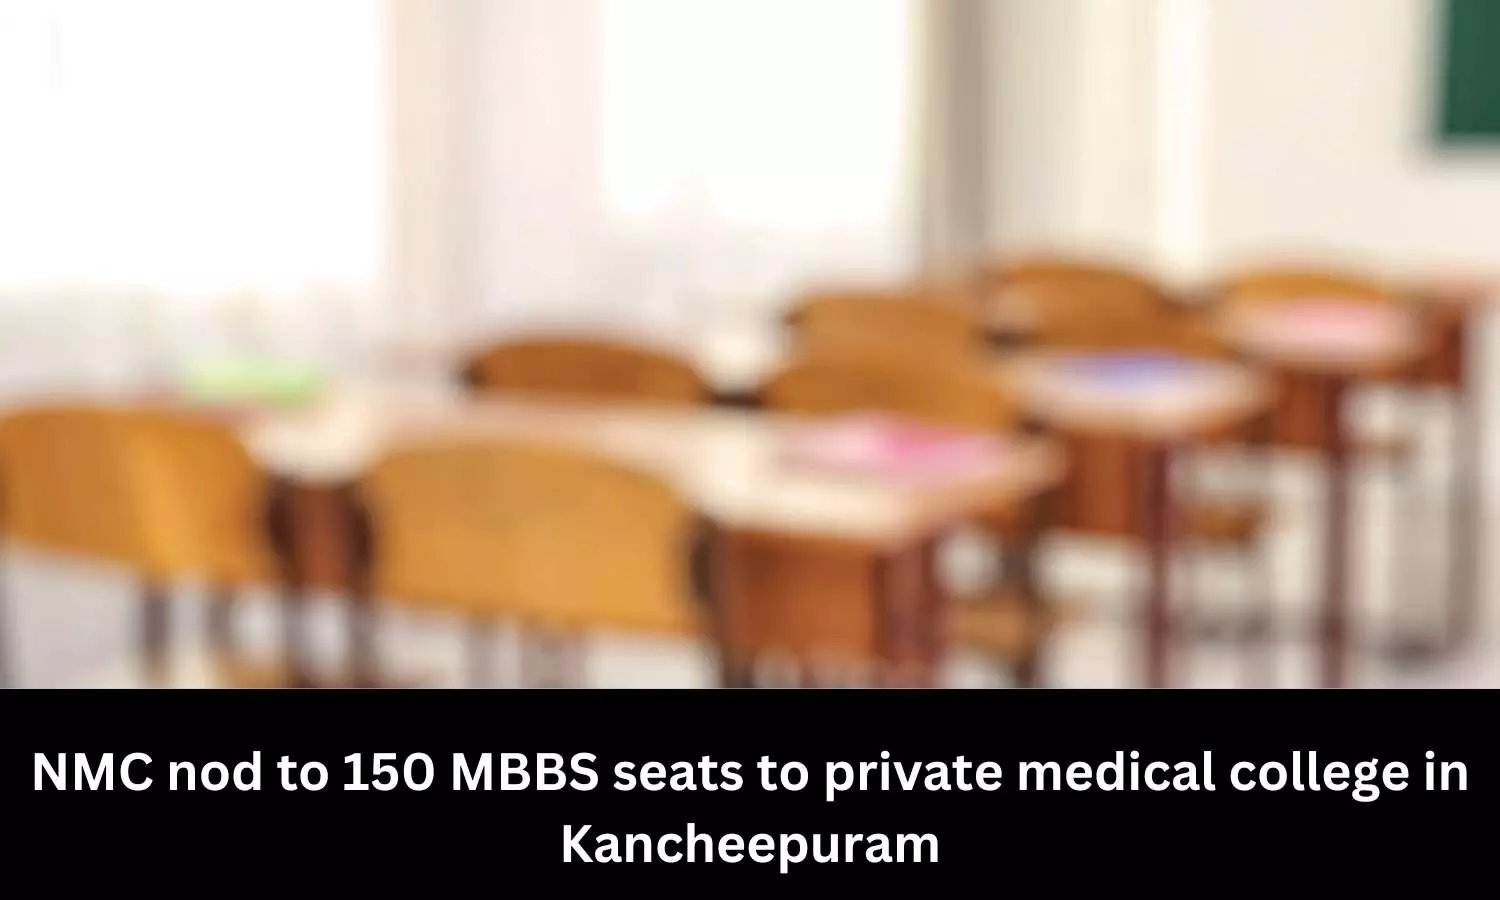 NMC nod to new self financing medical college in Kancheepuram with 150 MBBS seats